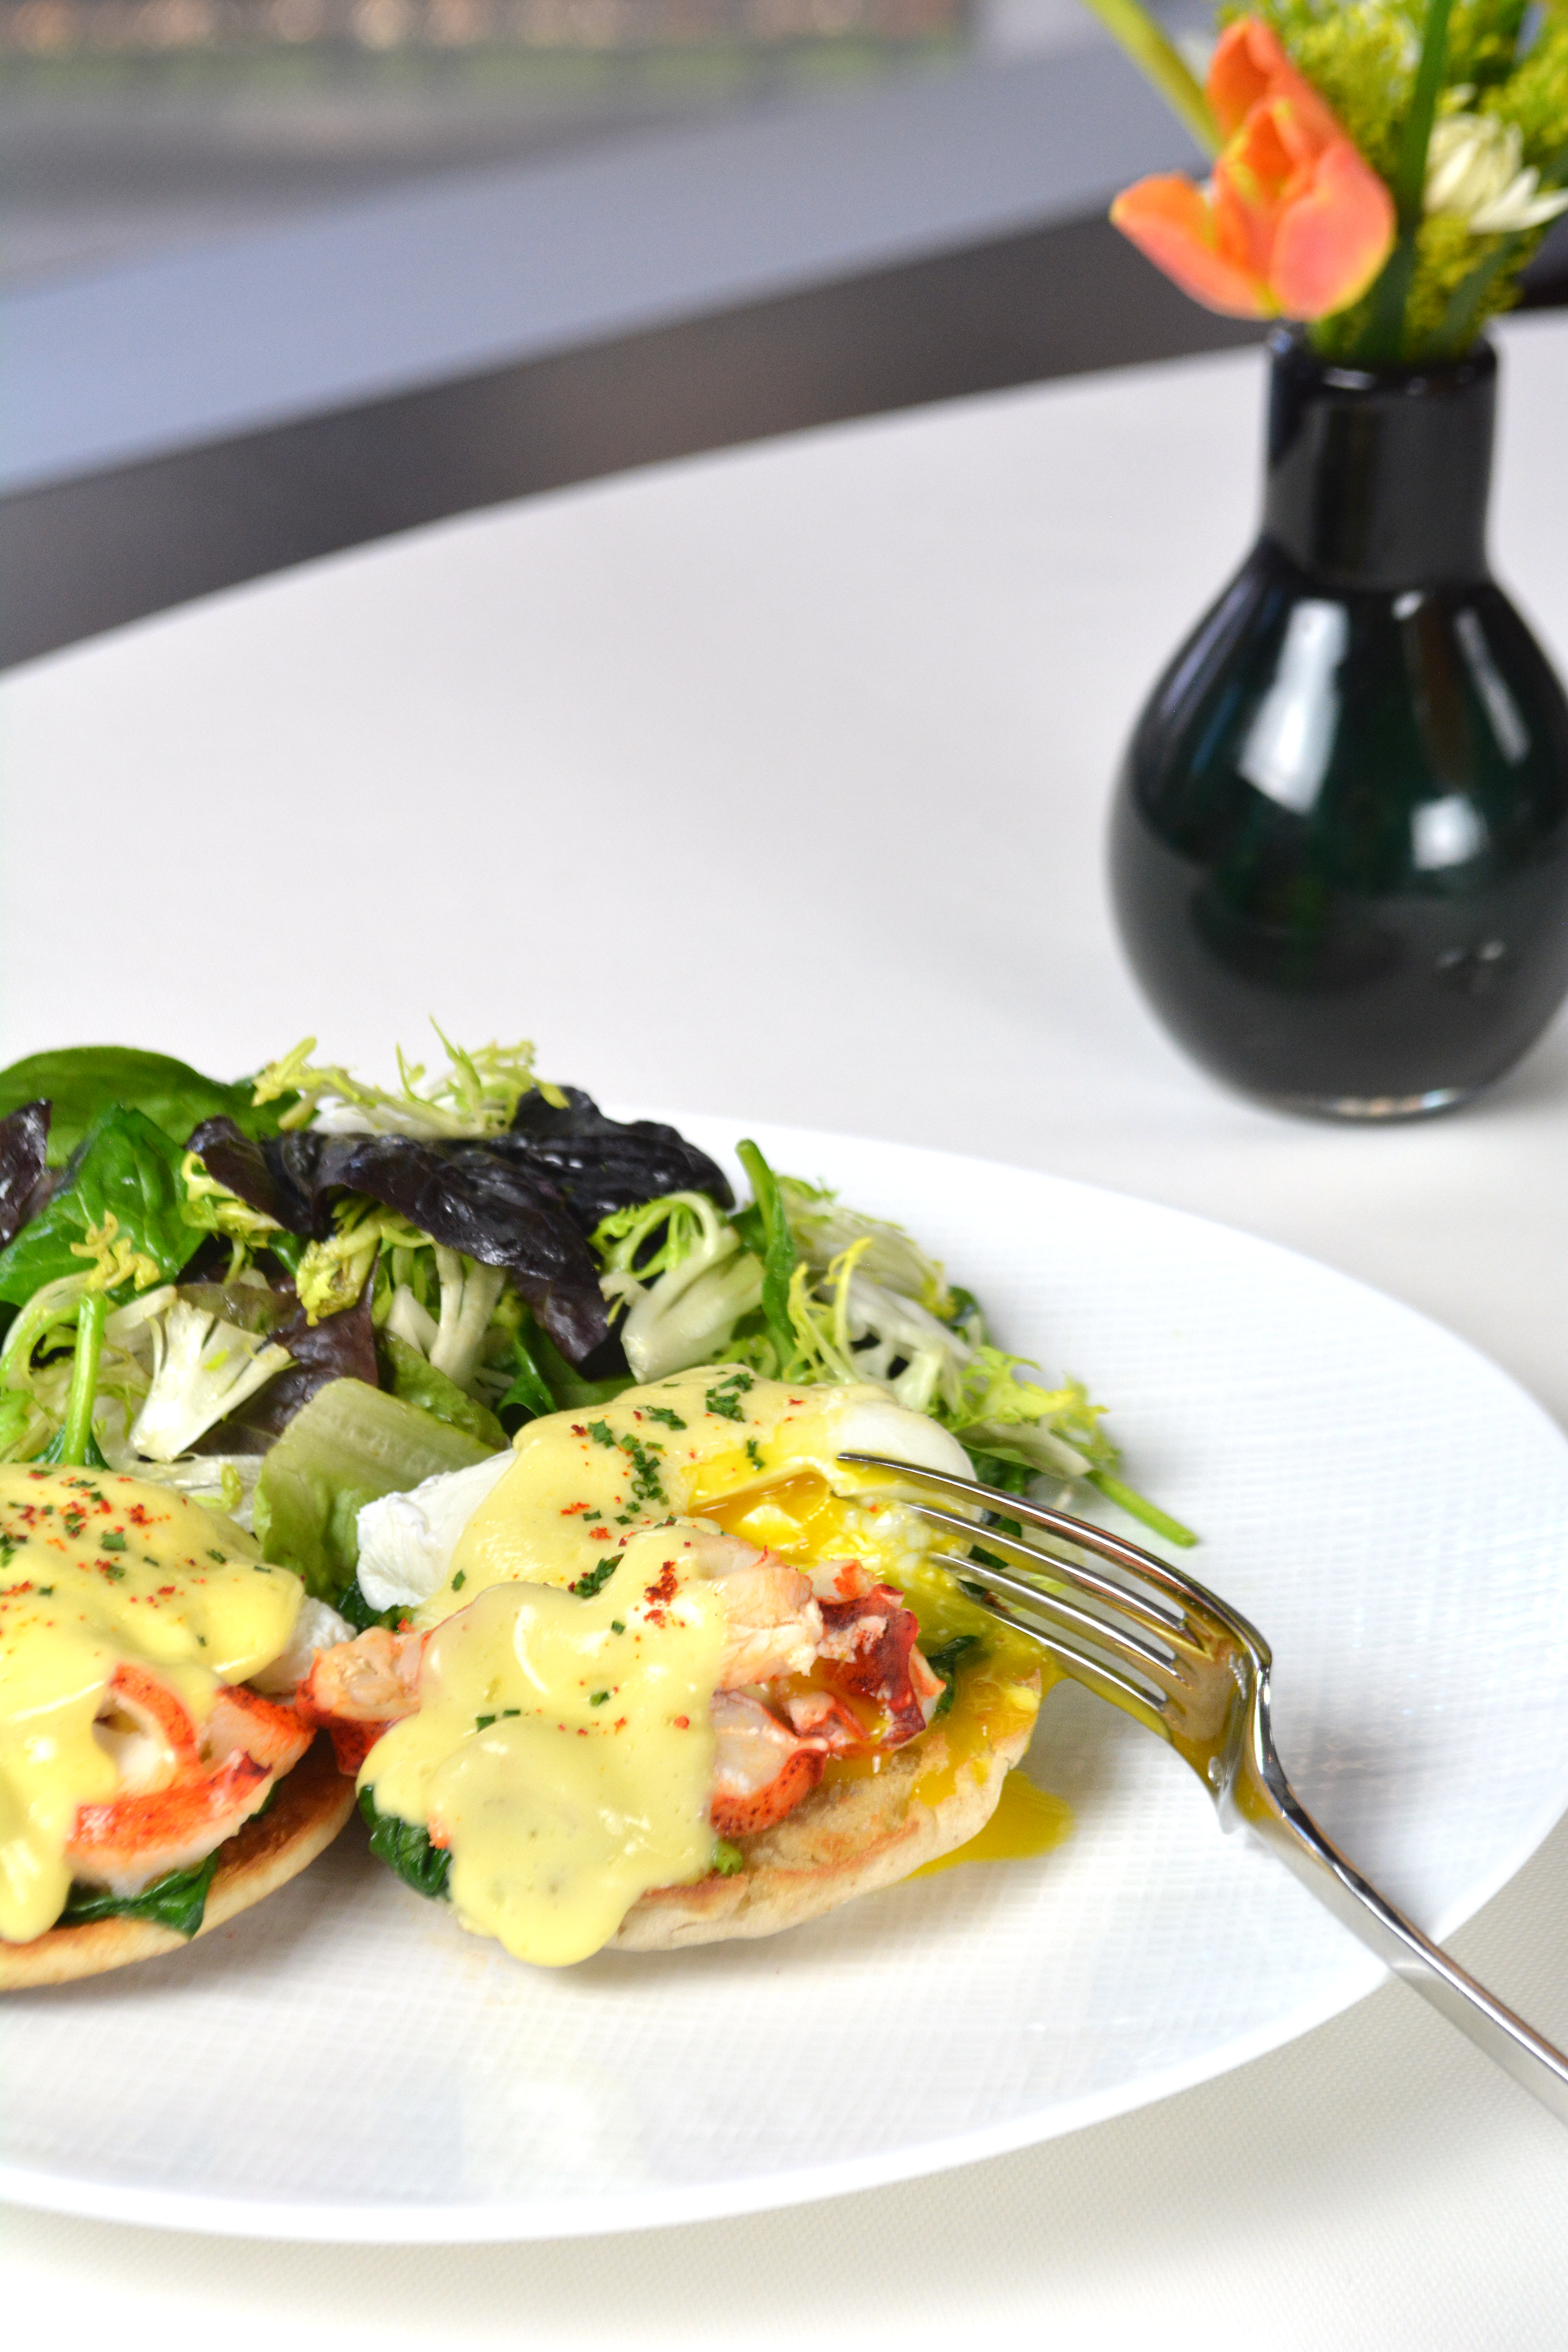 plate of eggs Benedict with a side salad